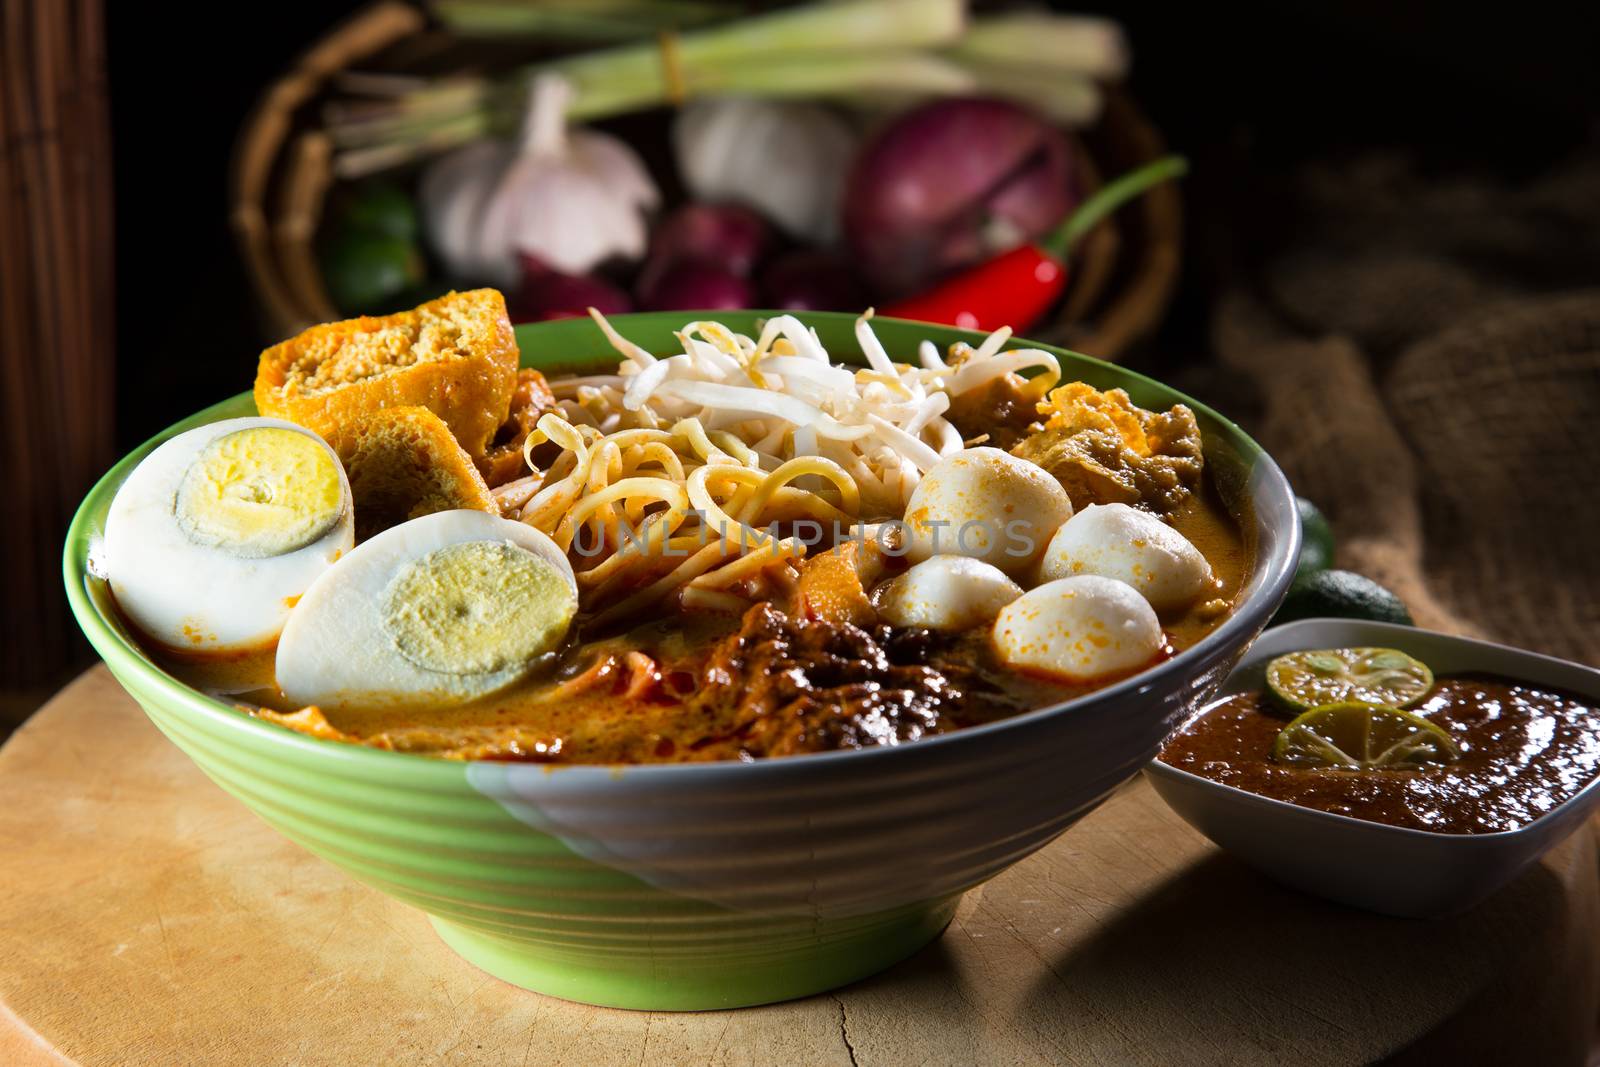 Curry Laksa which is a popular traditional spicy noodle soup from the culture in Malaysia.